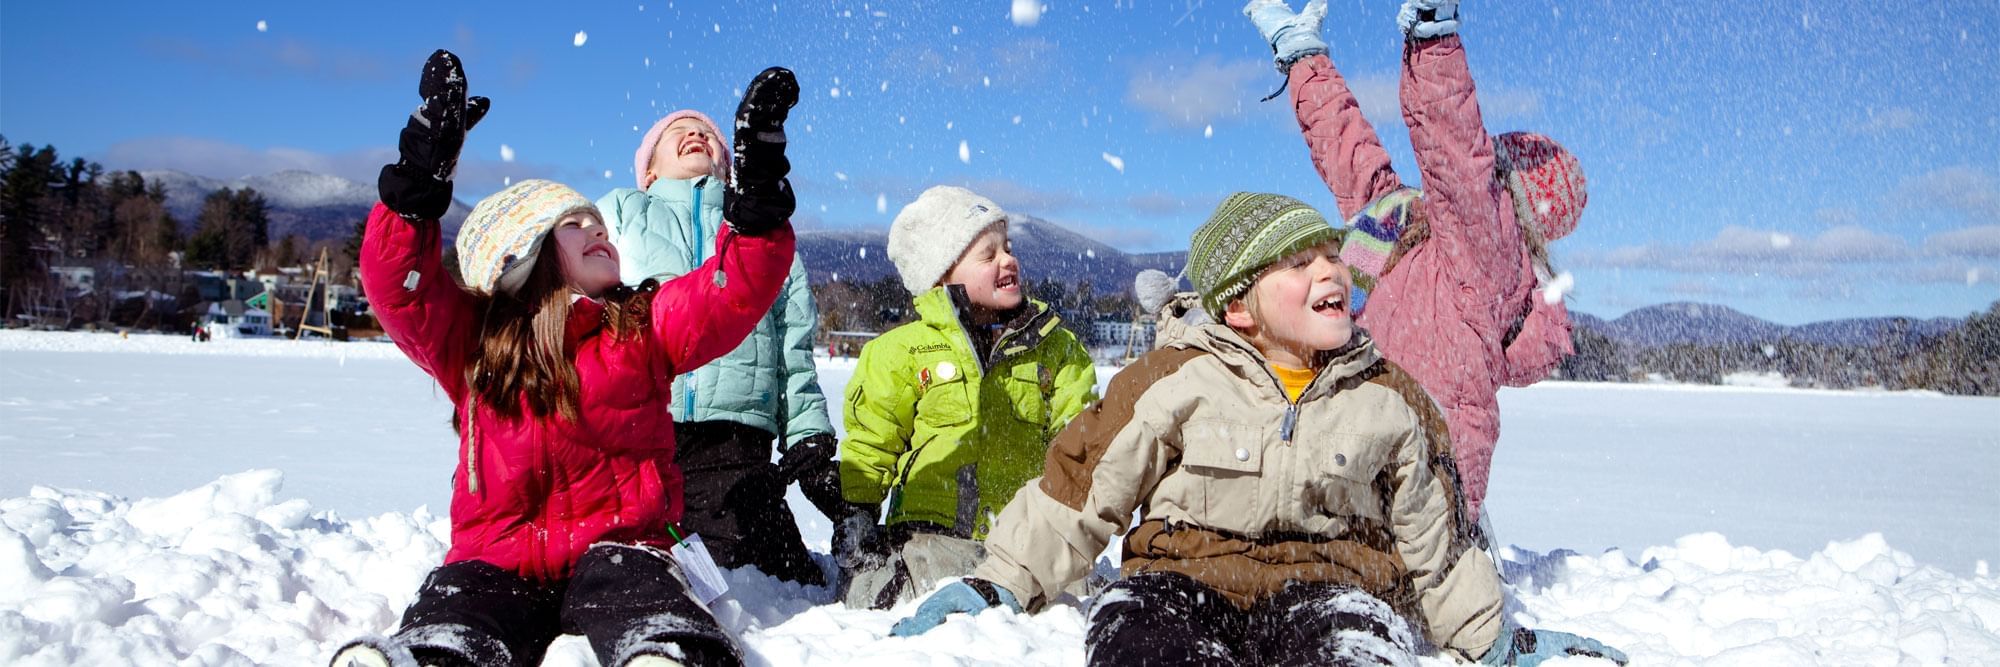 Kids throwing snow in the air.